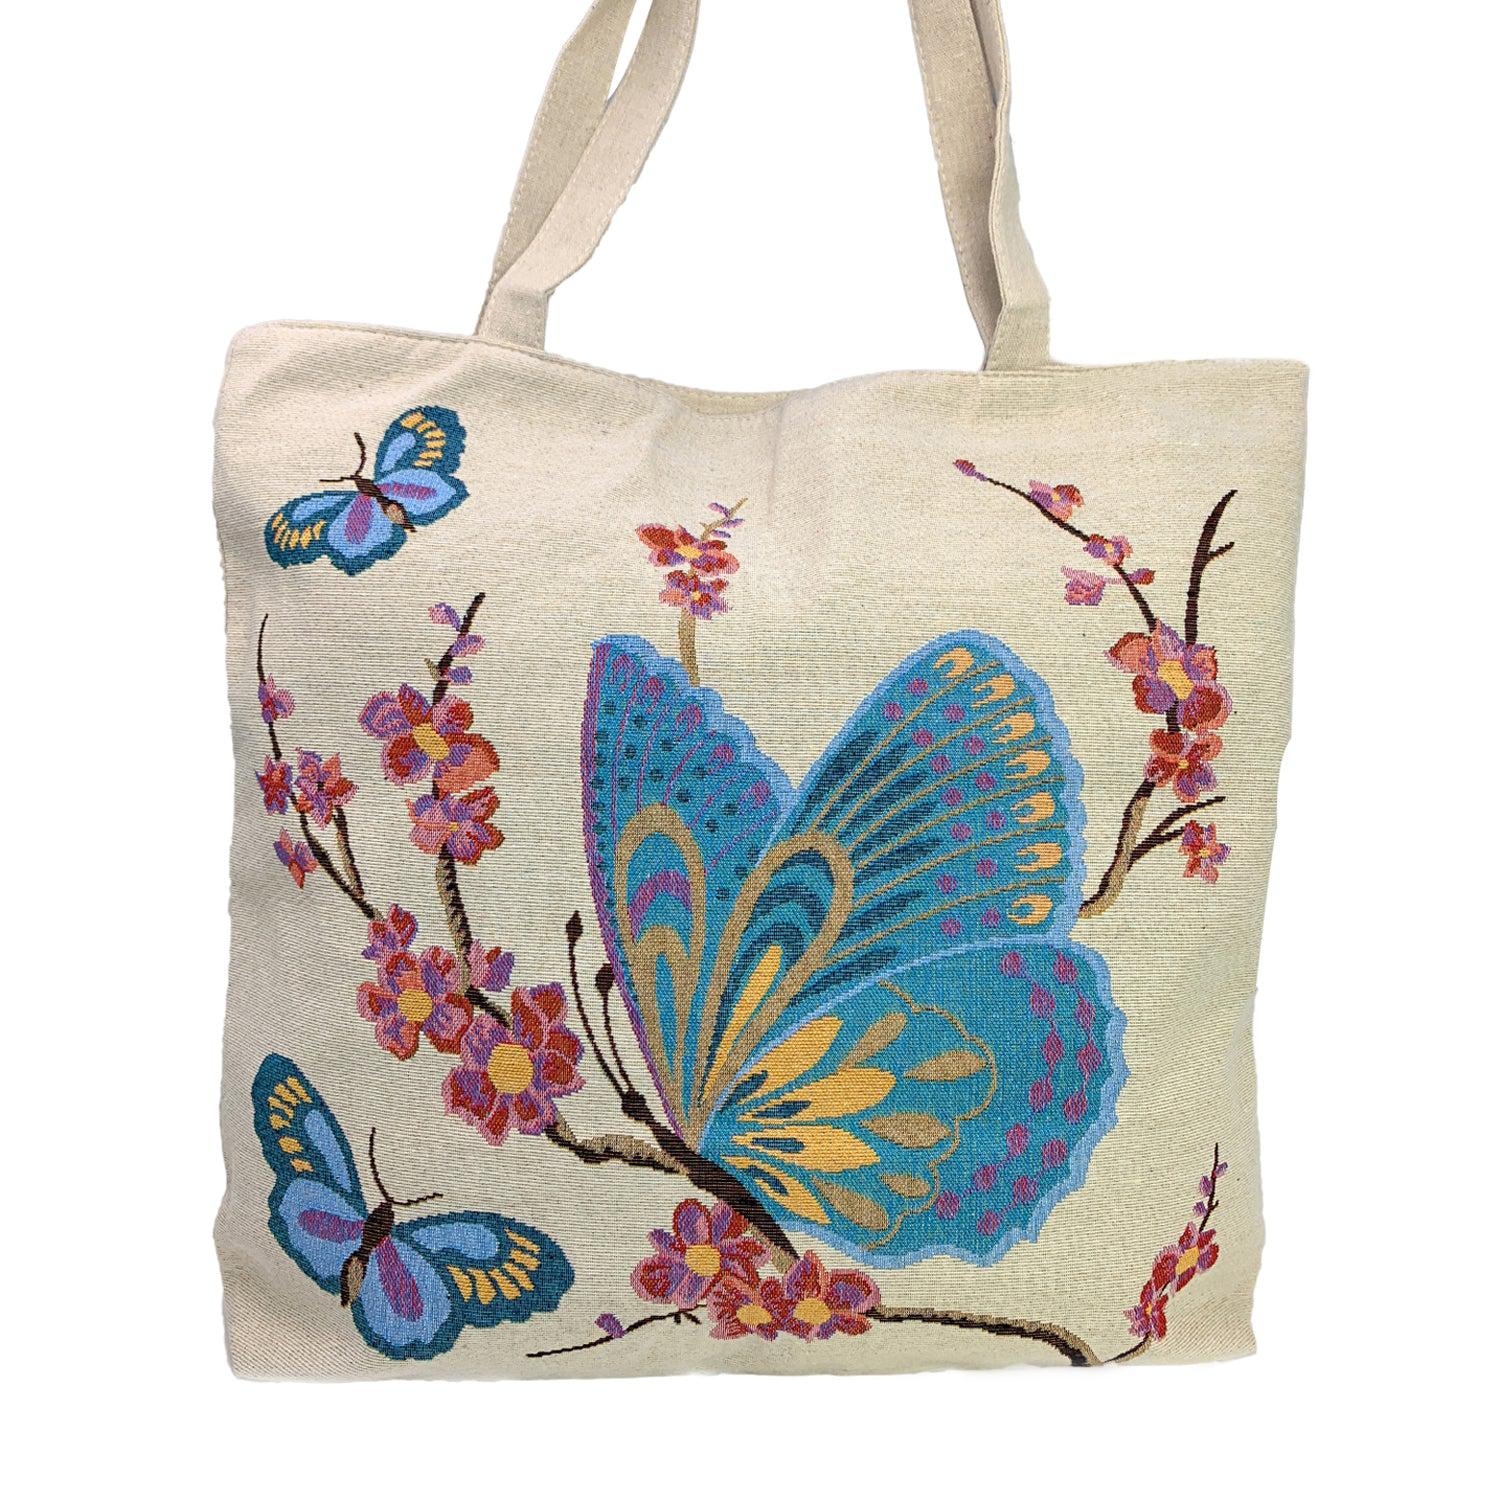 Empire Cove Butterfly Print Cotton Canvas Tote Bags Reusable Beach Shopping